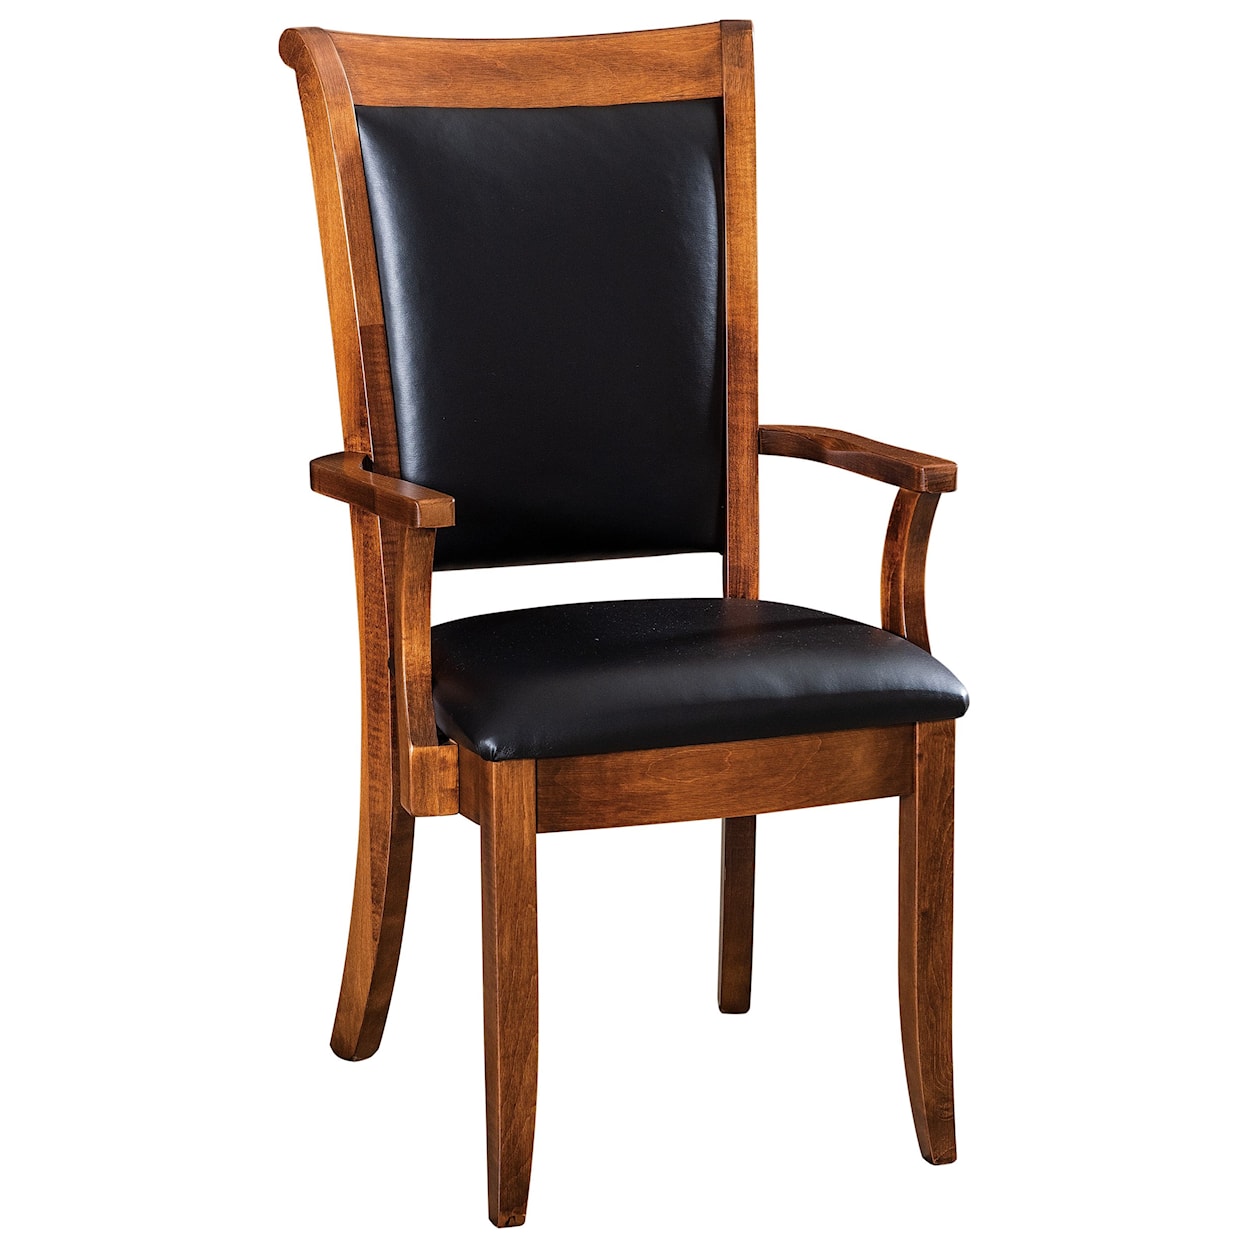 F&N Woodworking Kimberly Customizable Solid Wood Dining Arm Chair